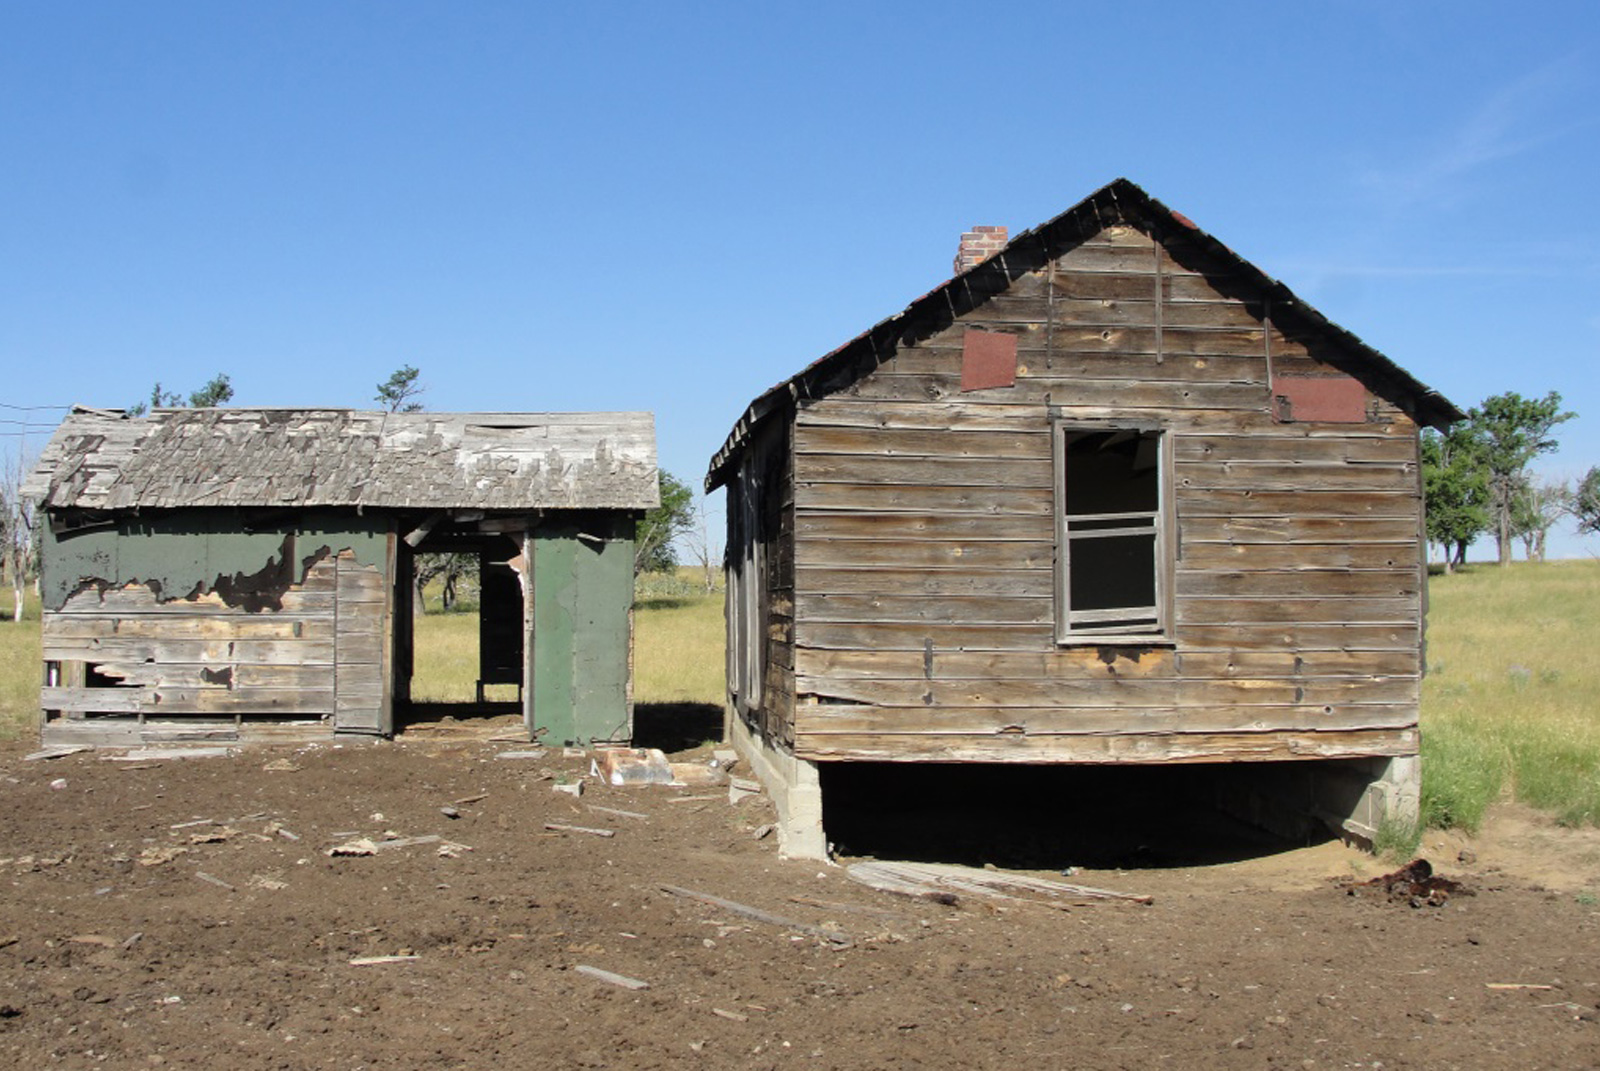 Two abandoned and deteriorated wooden sheds.